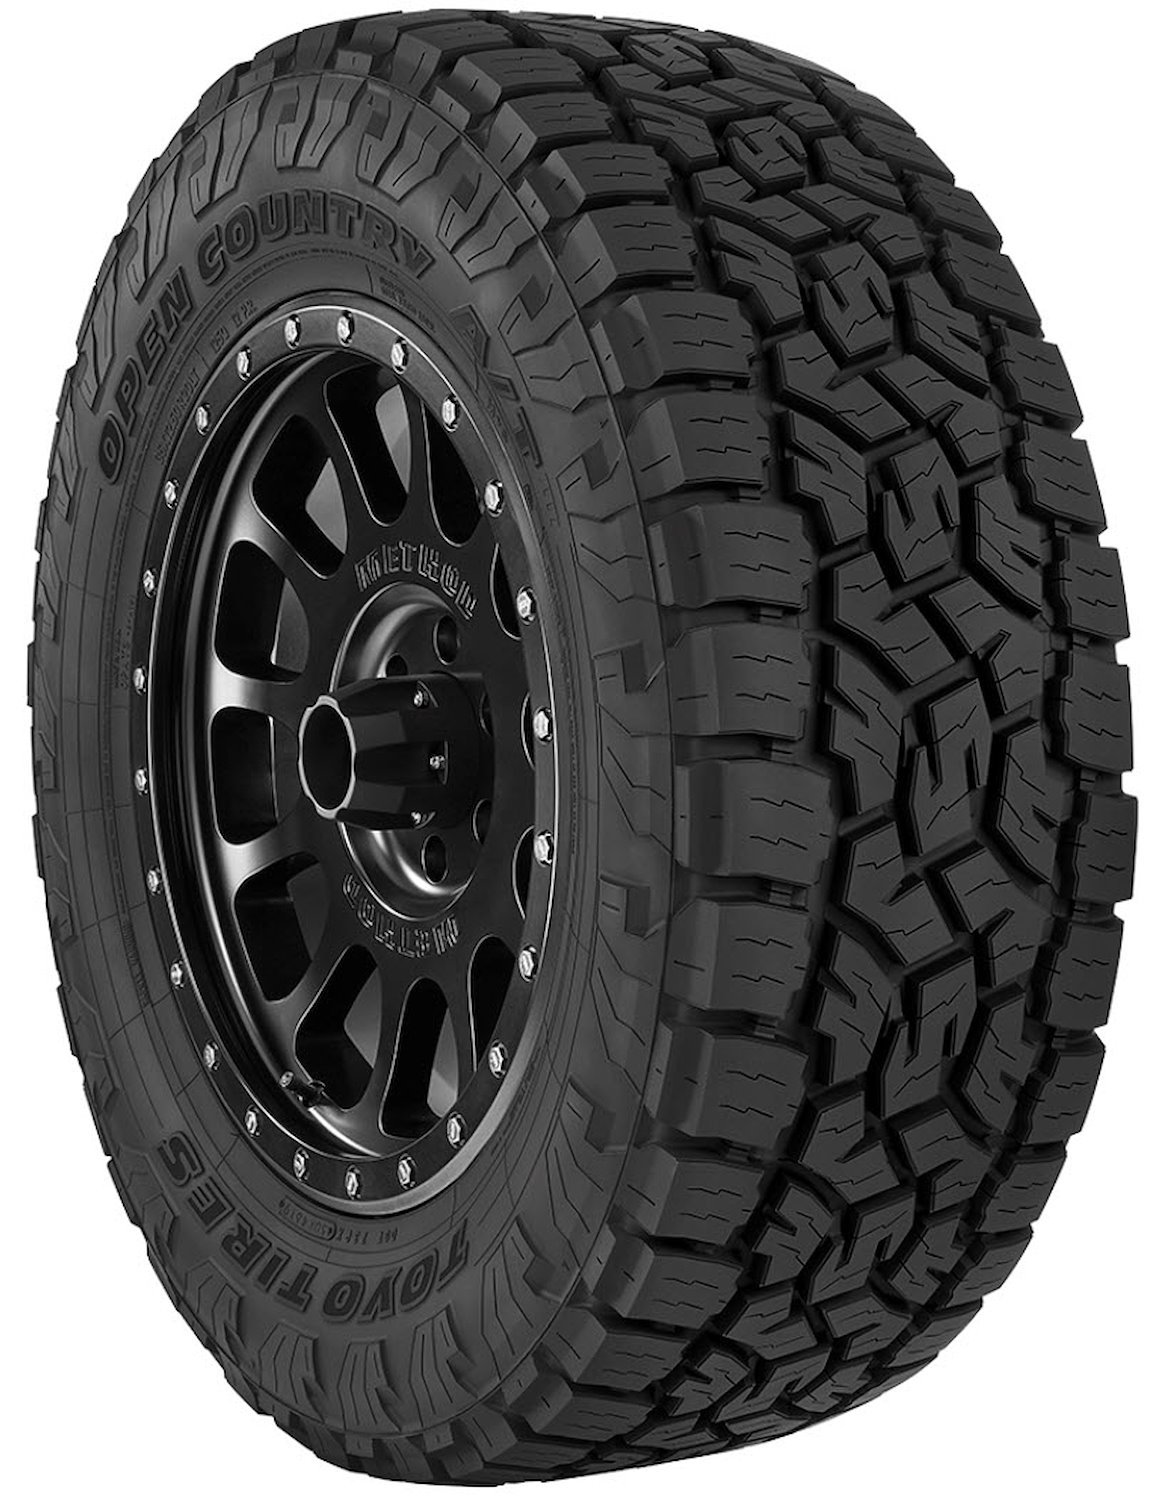 Open Country A/T III Light Truck Radial Tire 245/65R17